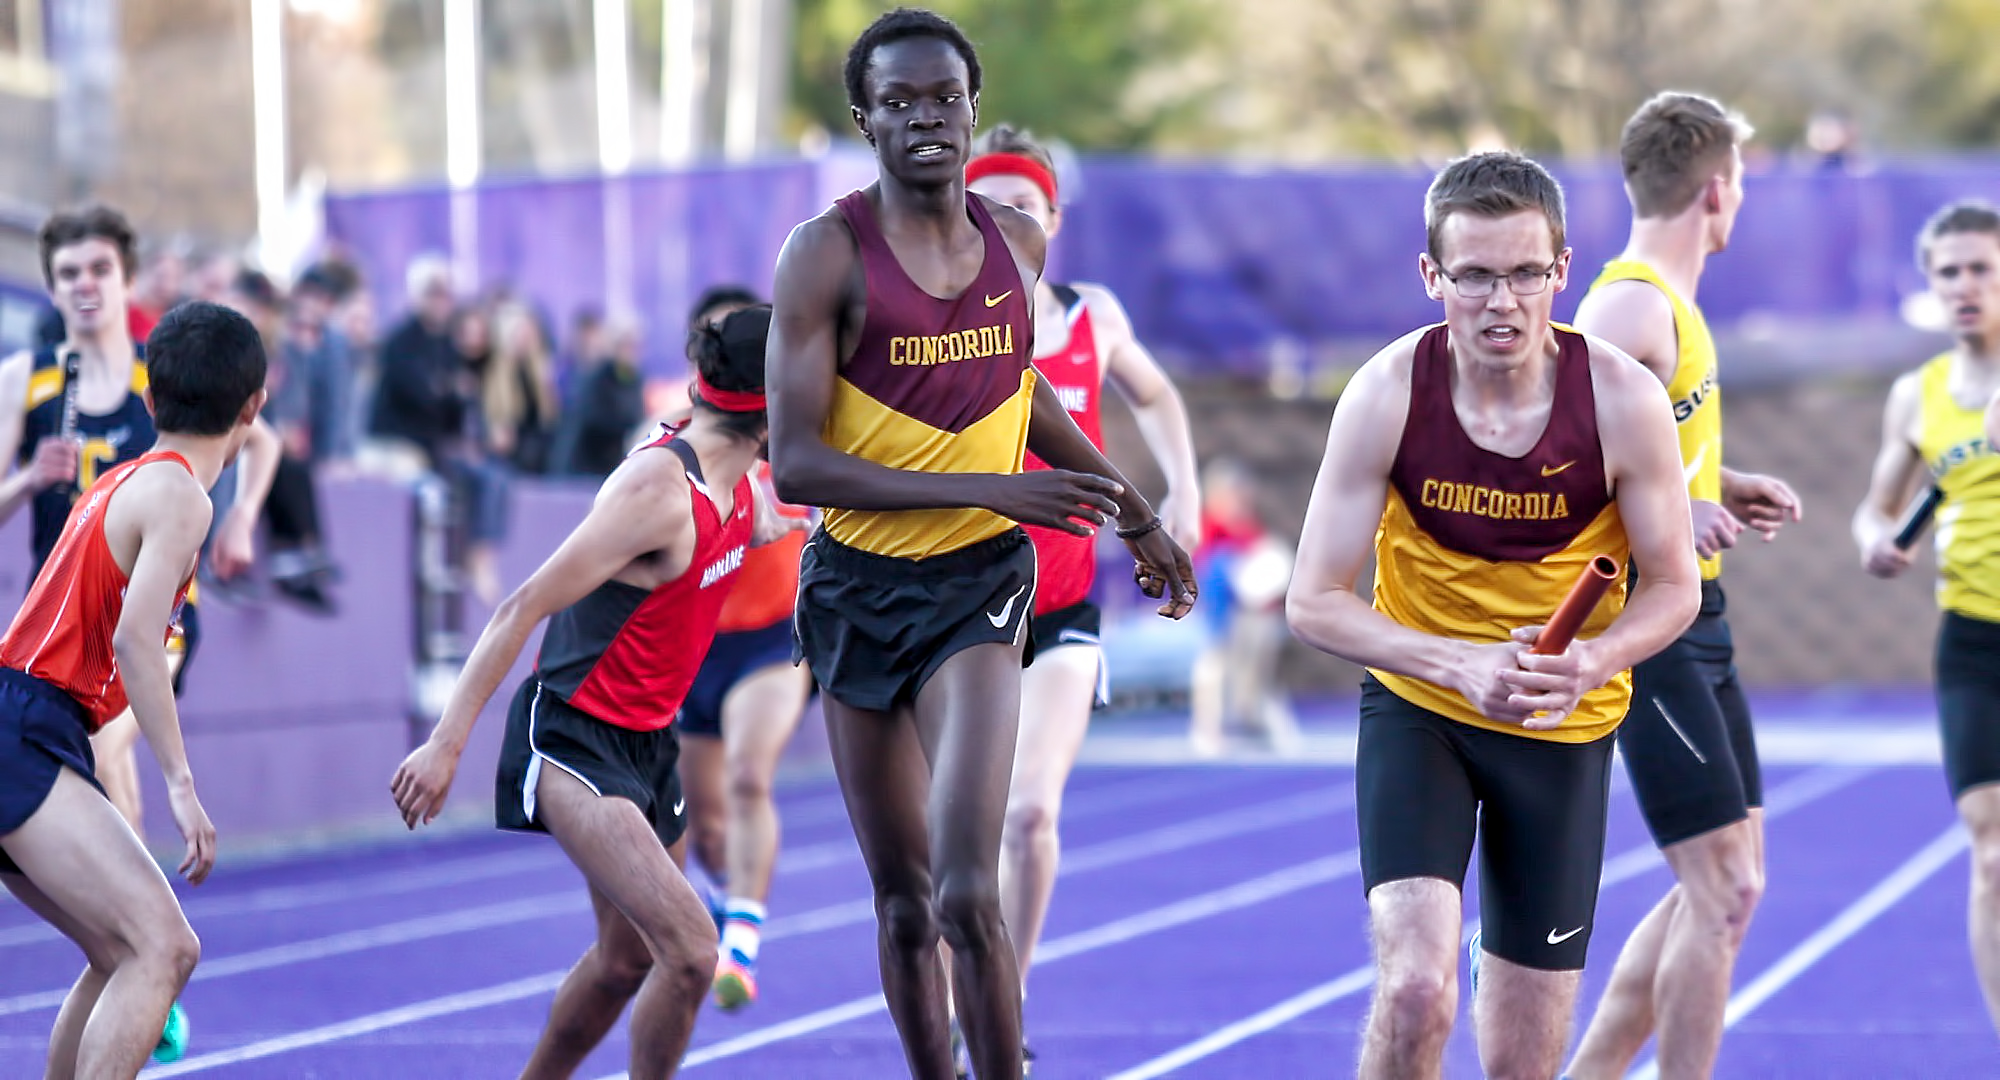 Munir Isahak hands the baton to Nolan Christenson in the 4x800-meter relay on Day 1 at the MIAC Outdoor Championship Meet. (photo courtesy of Nathan Lodermeier)